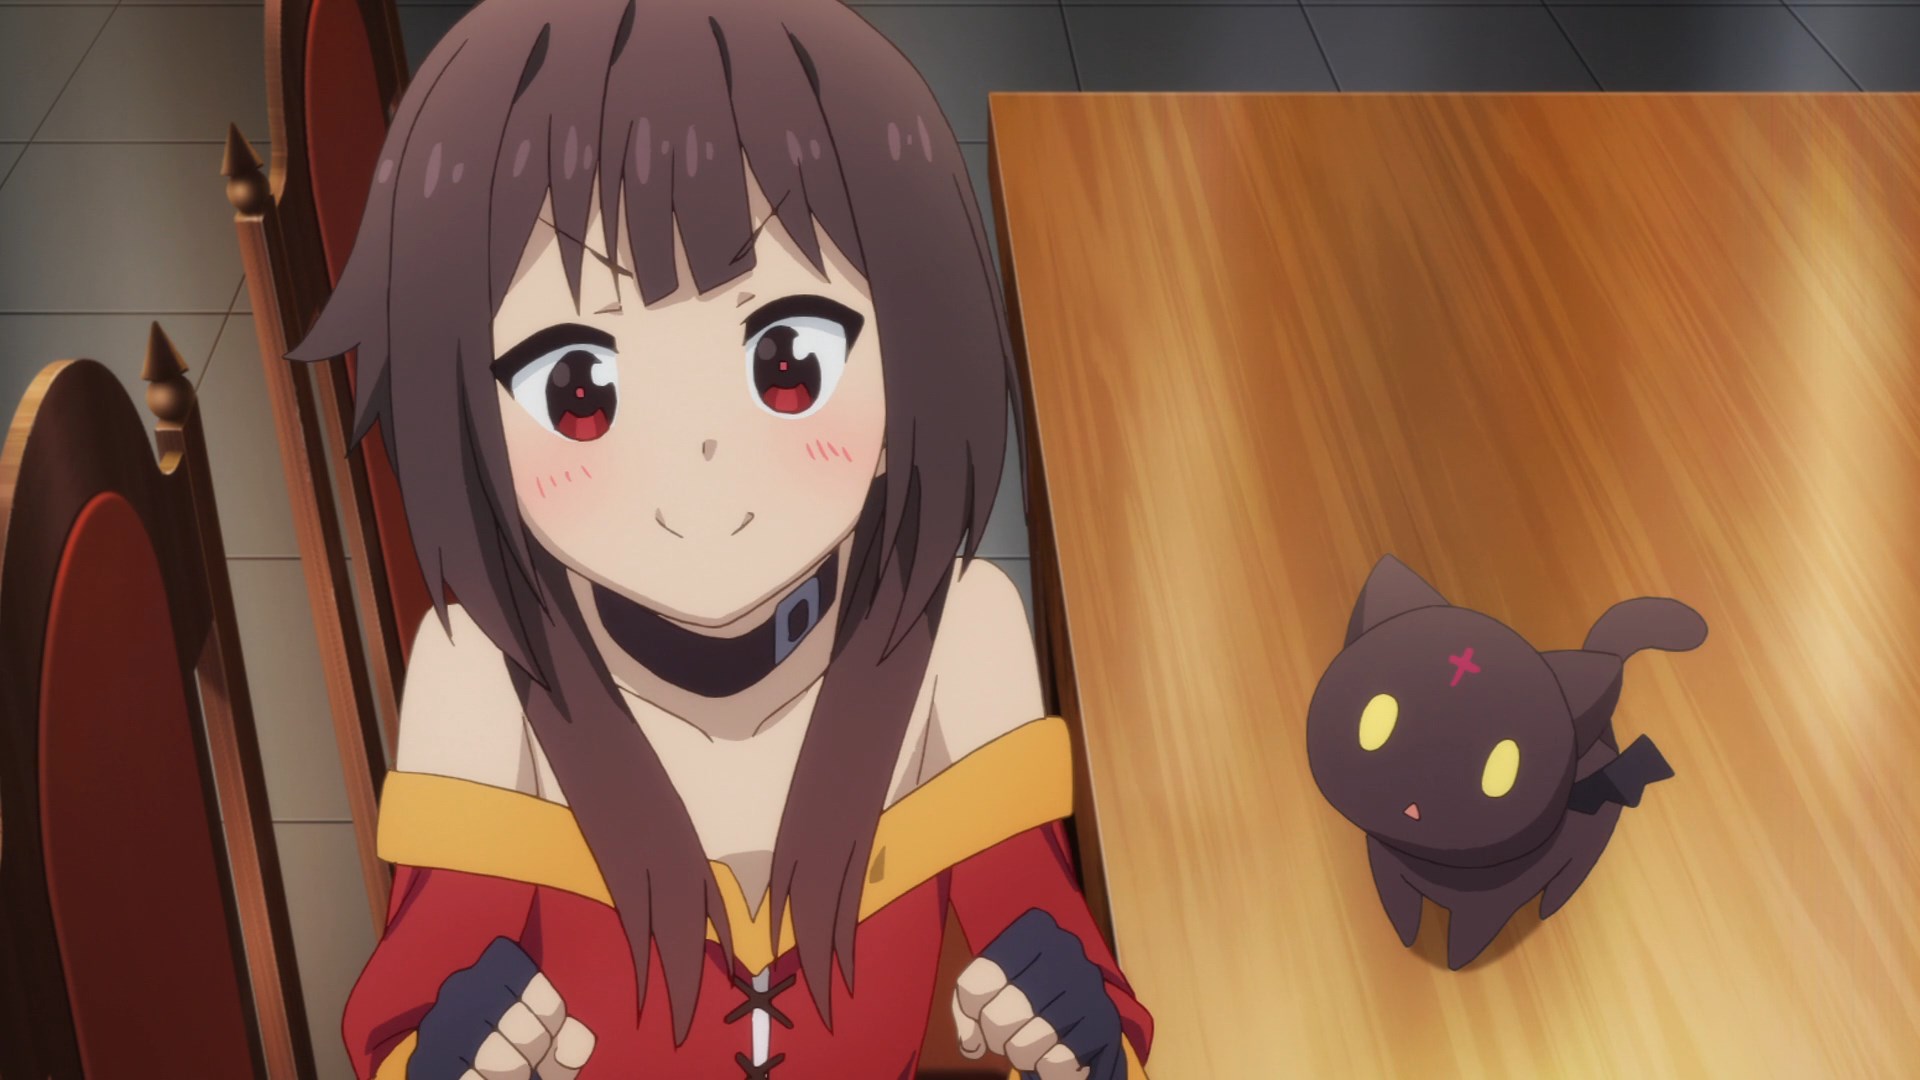 KonoSuba spin-off release time, date confirmed for Megumin anime